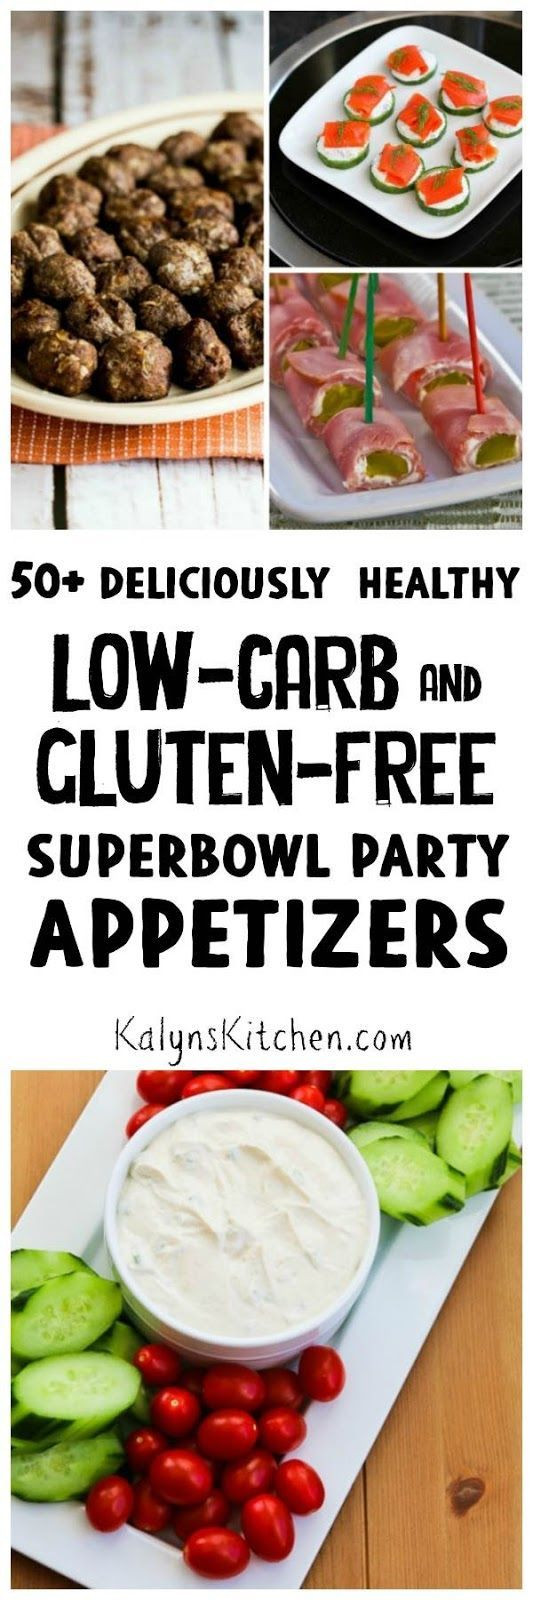 Healthy Superbowl Snacks
 50 Low Carb and Gluten Free Super Bowl Appetizer Recipes